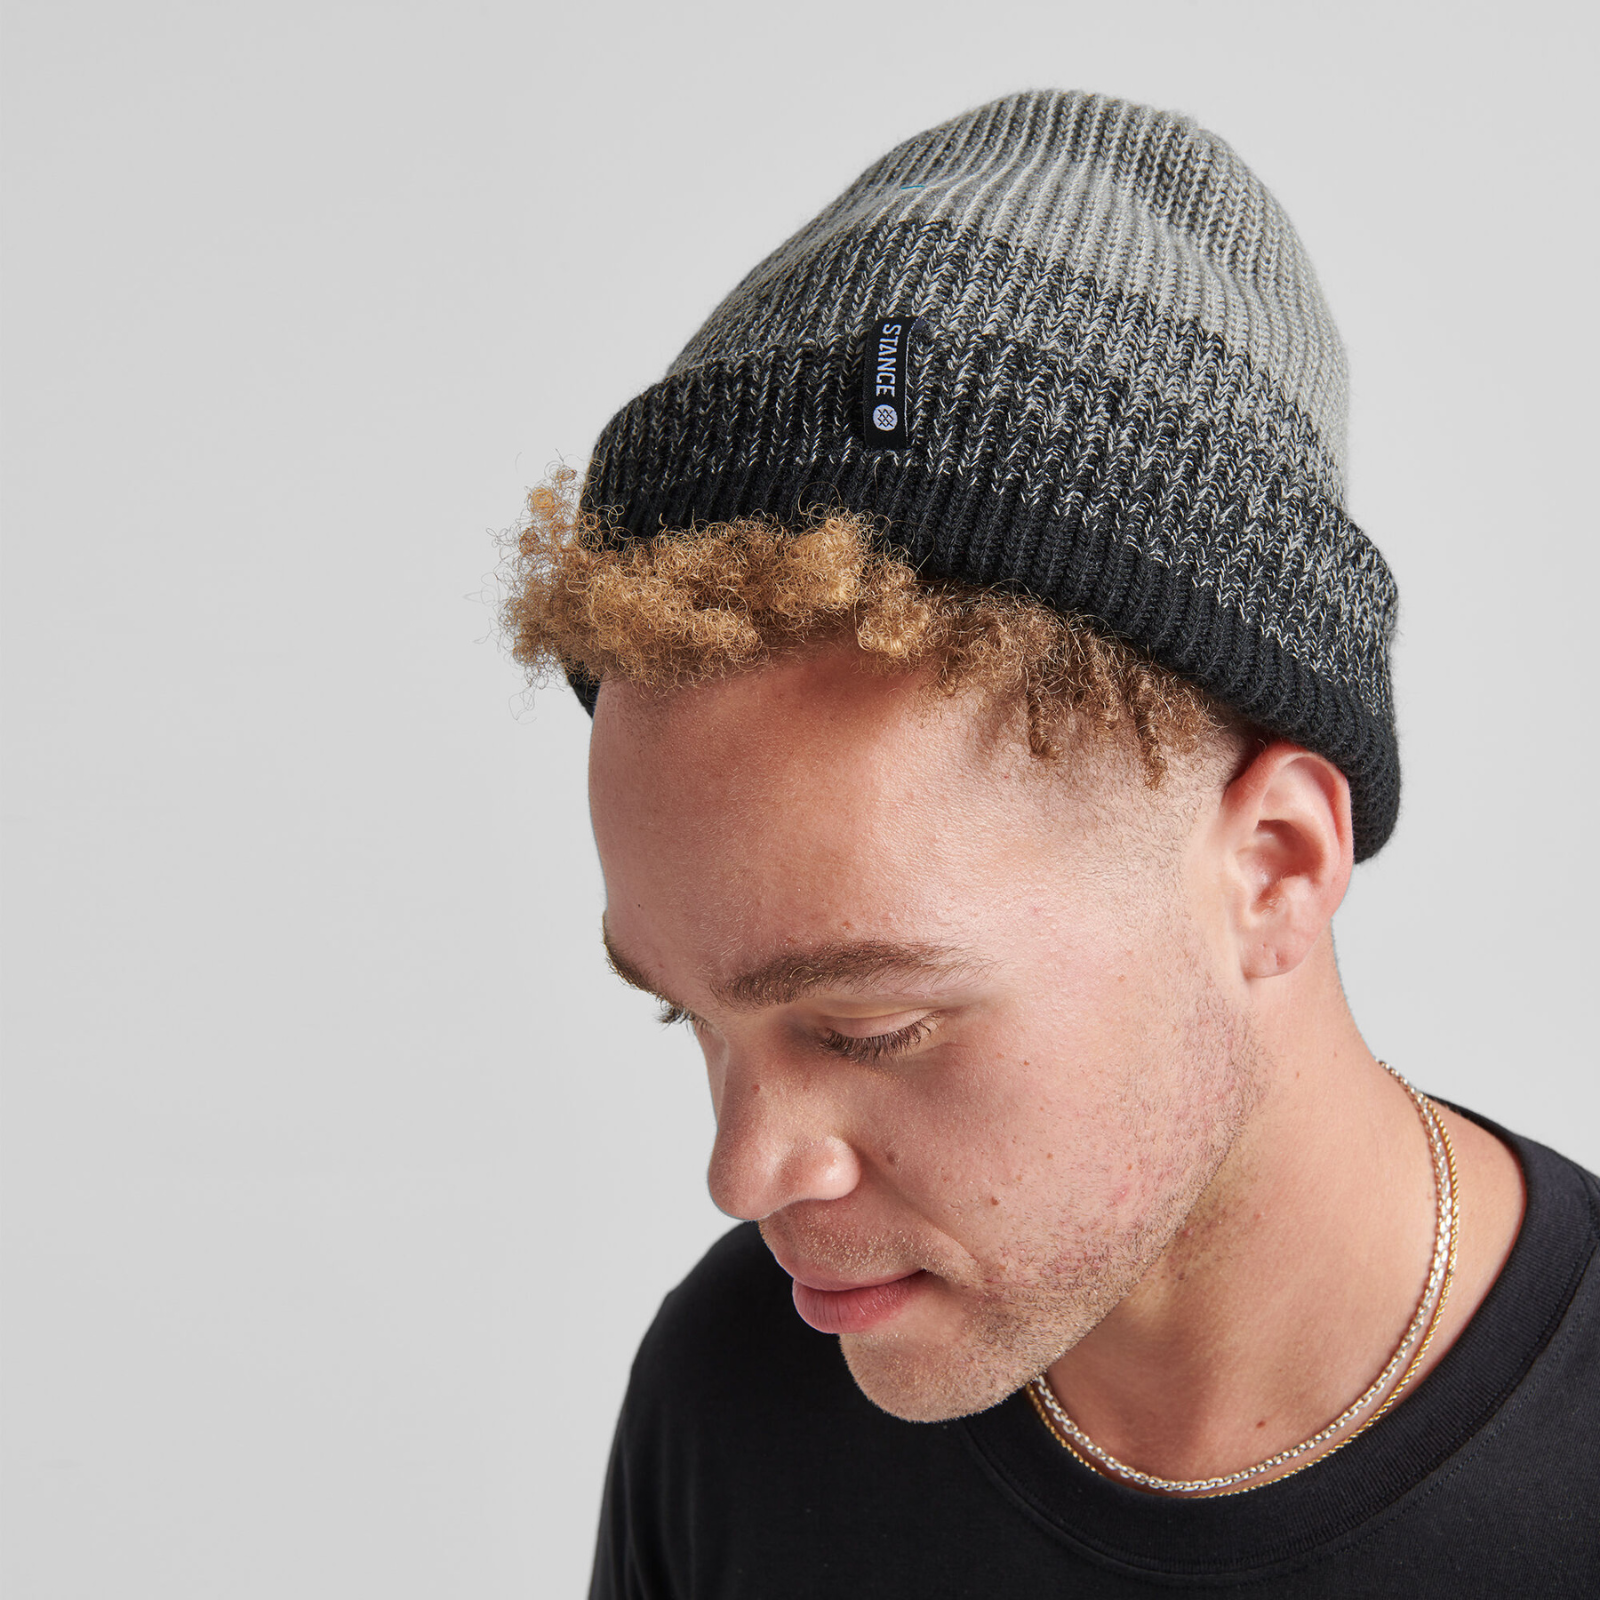 Stance Fade Beanie featuring gray and black pattern on model